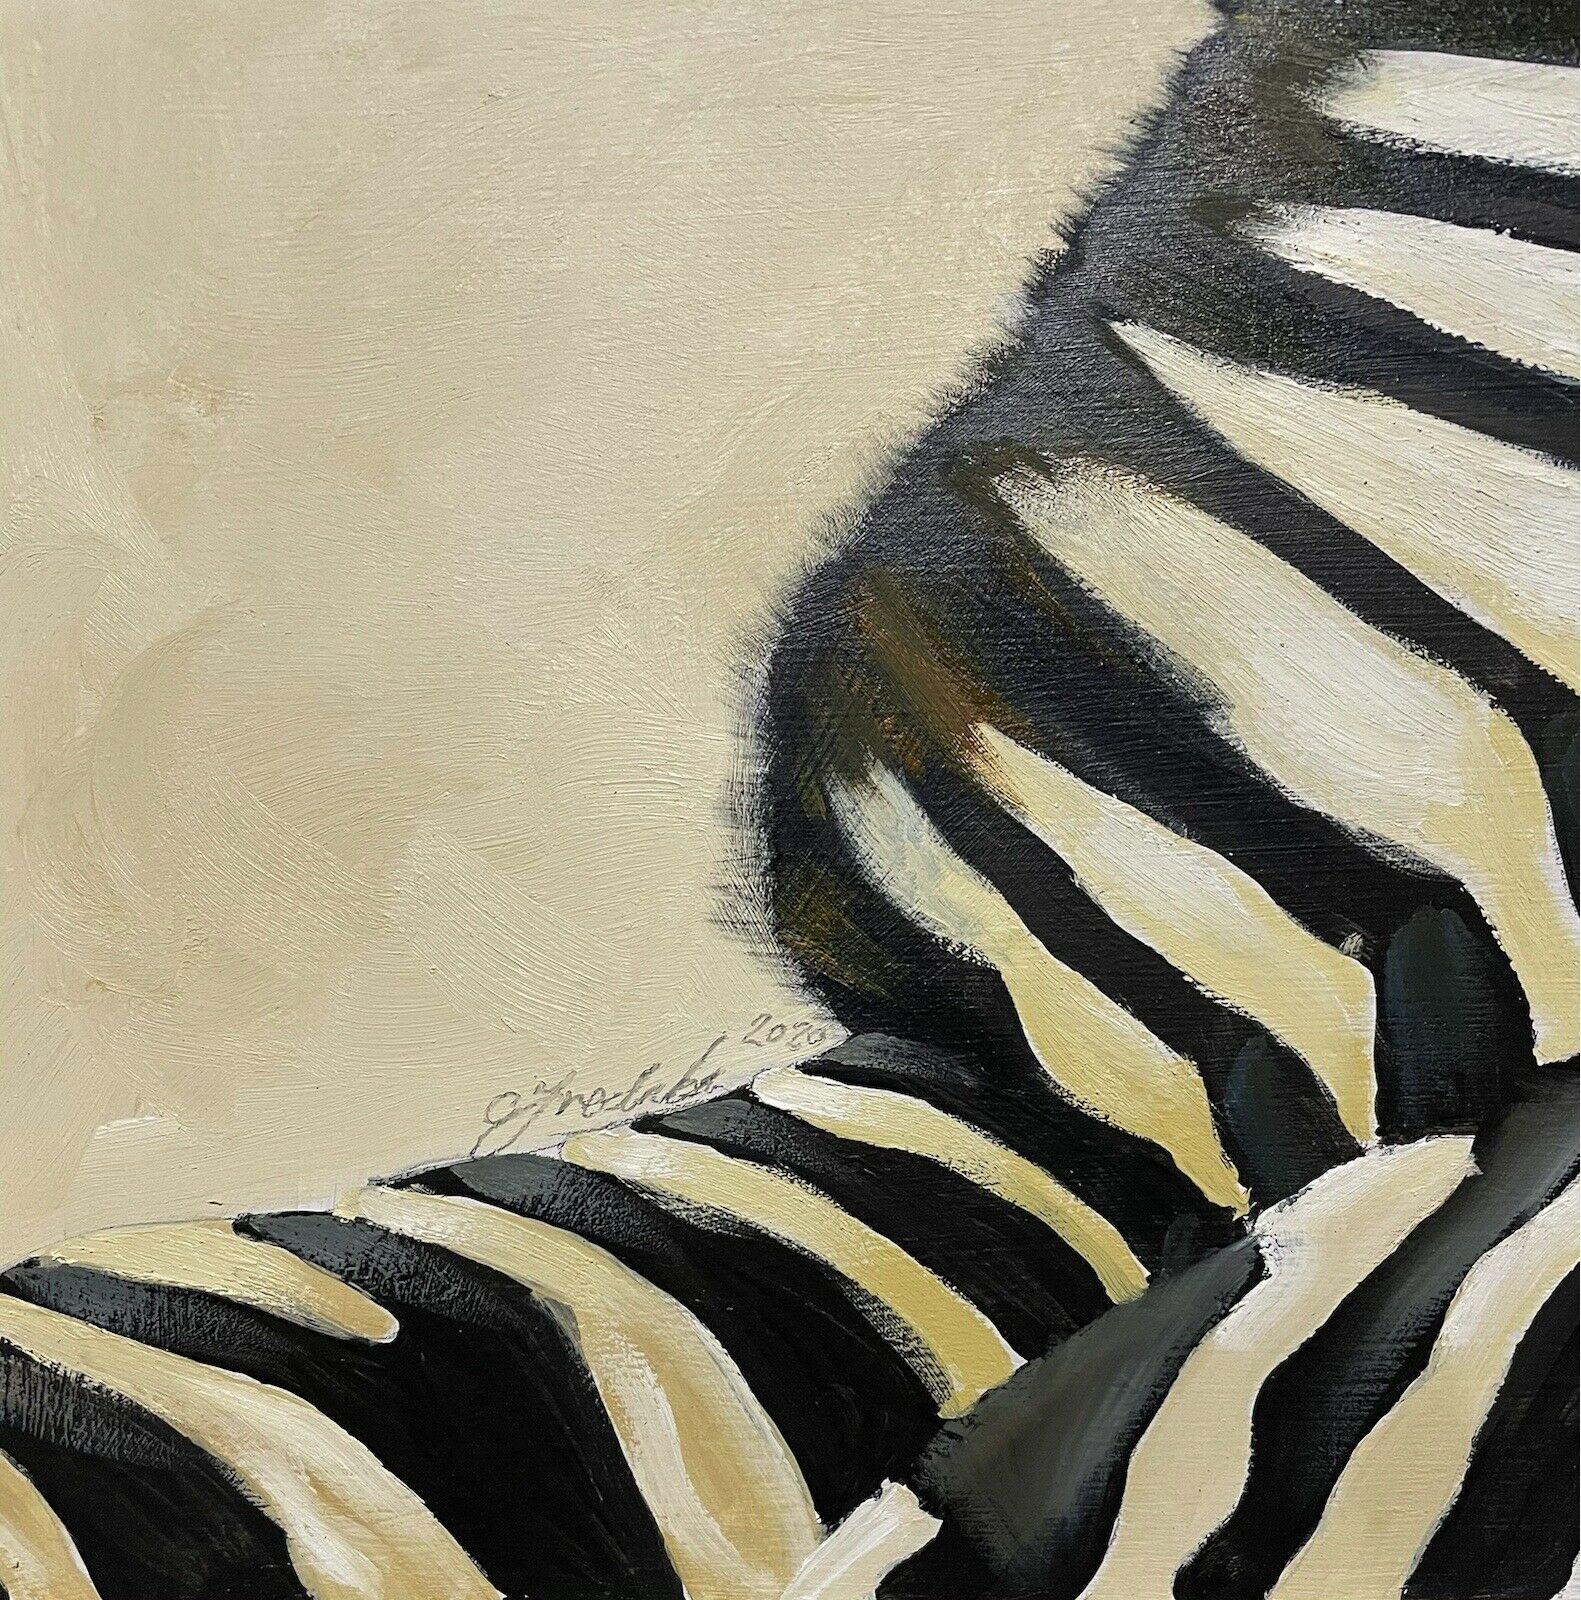 HUGE OIL PAINTING OF TWO ZEBRAS - BY CLIVE FREDRIKSSON - FRAMED & STUNNING 2